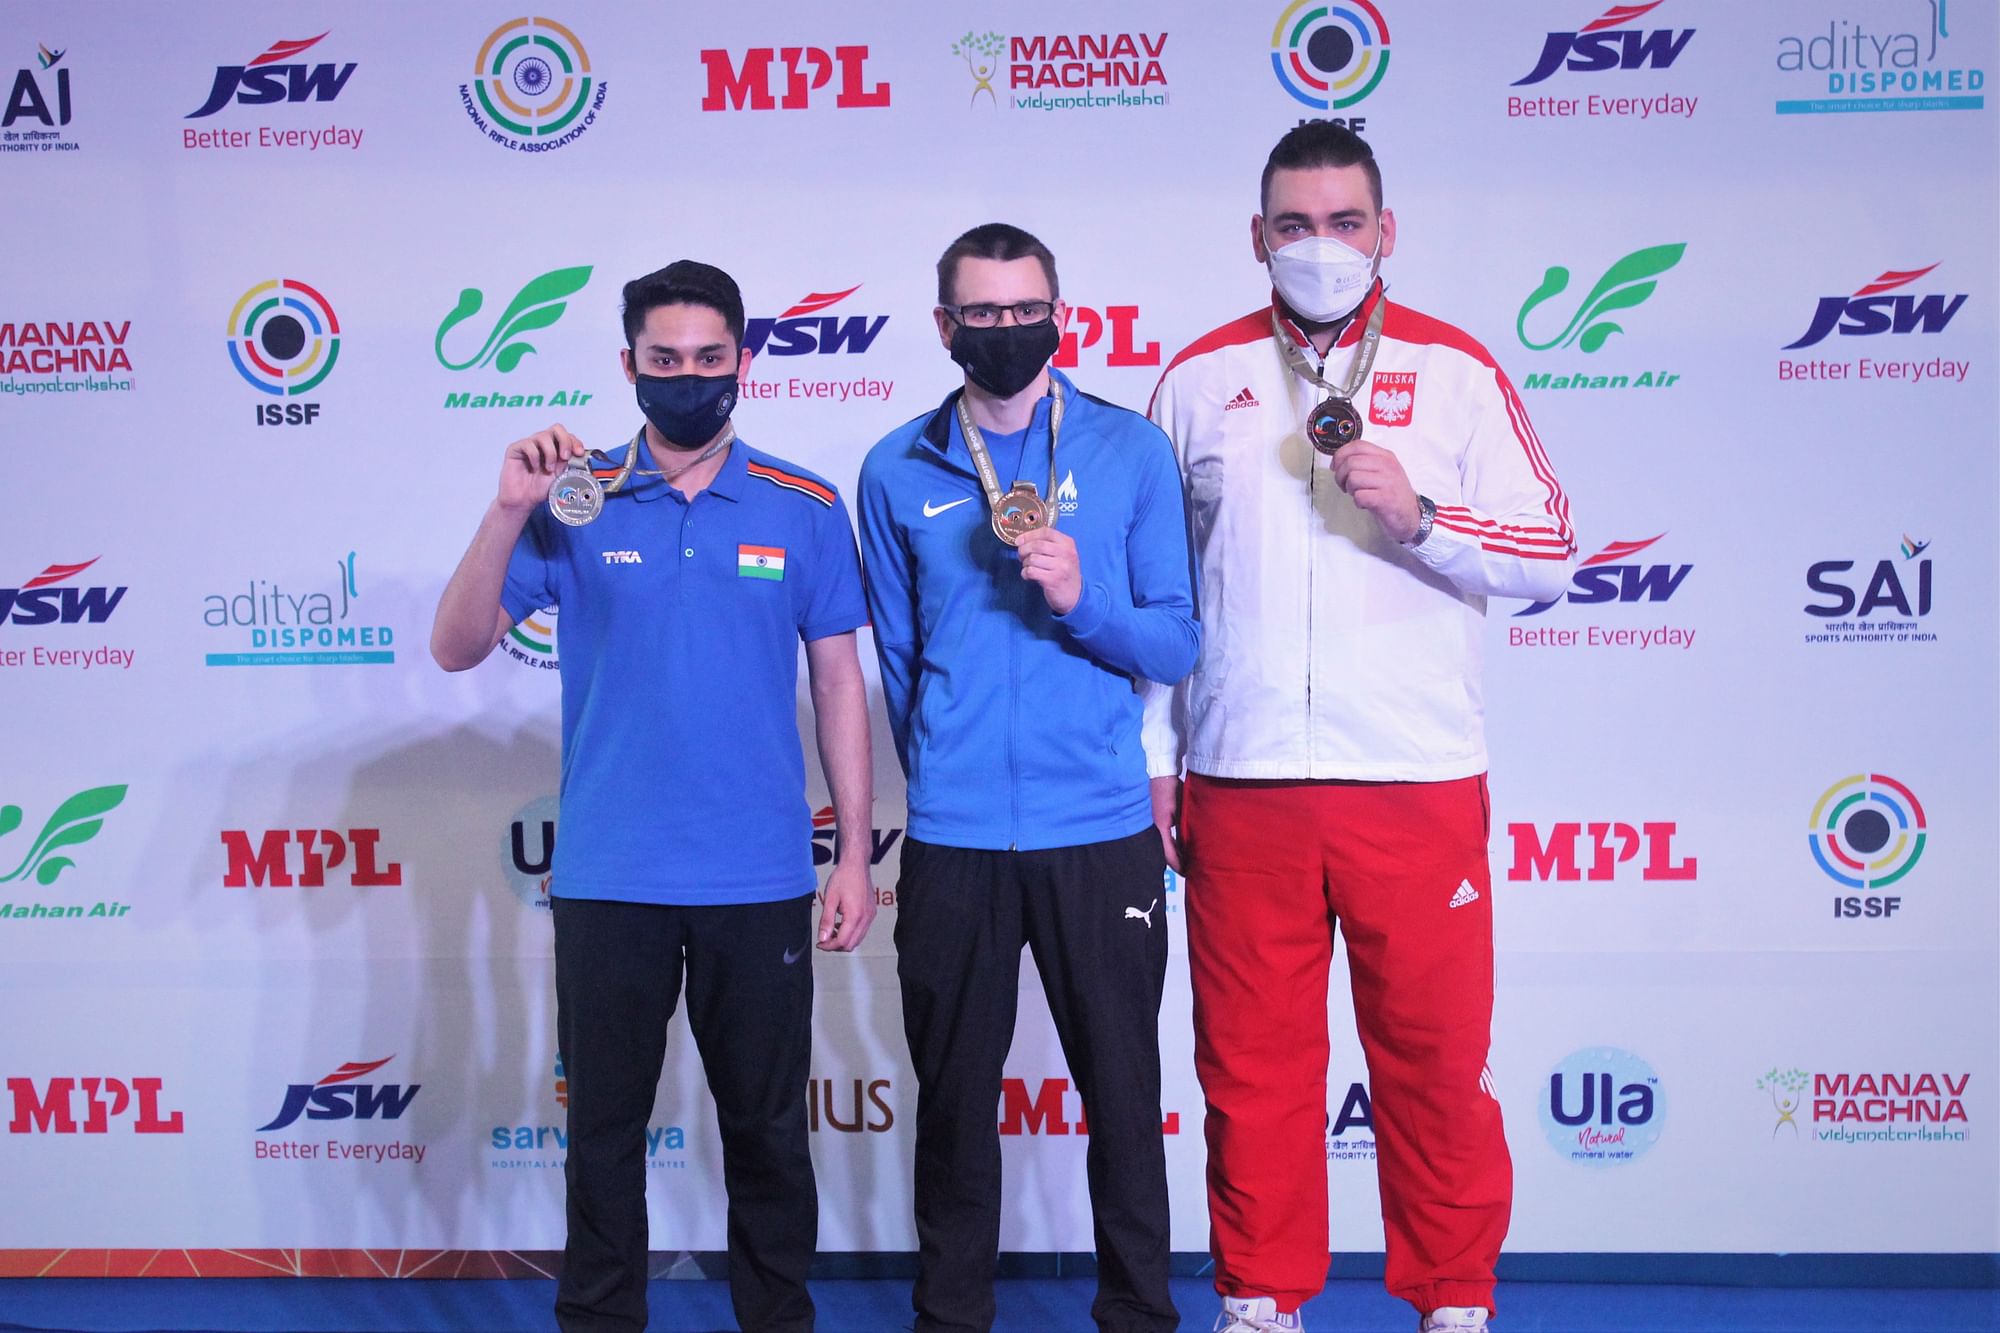 India’s Vijayveer Sidhu stands with his silver medal in the 25m Rapid Fire Pistol Men’s final at the 2021 ISSF World Cup in N